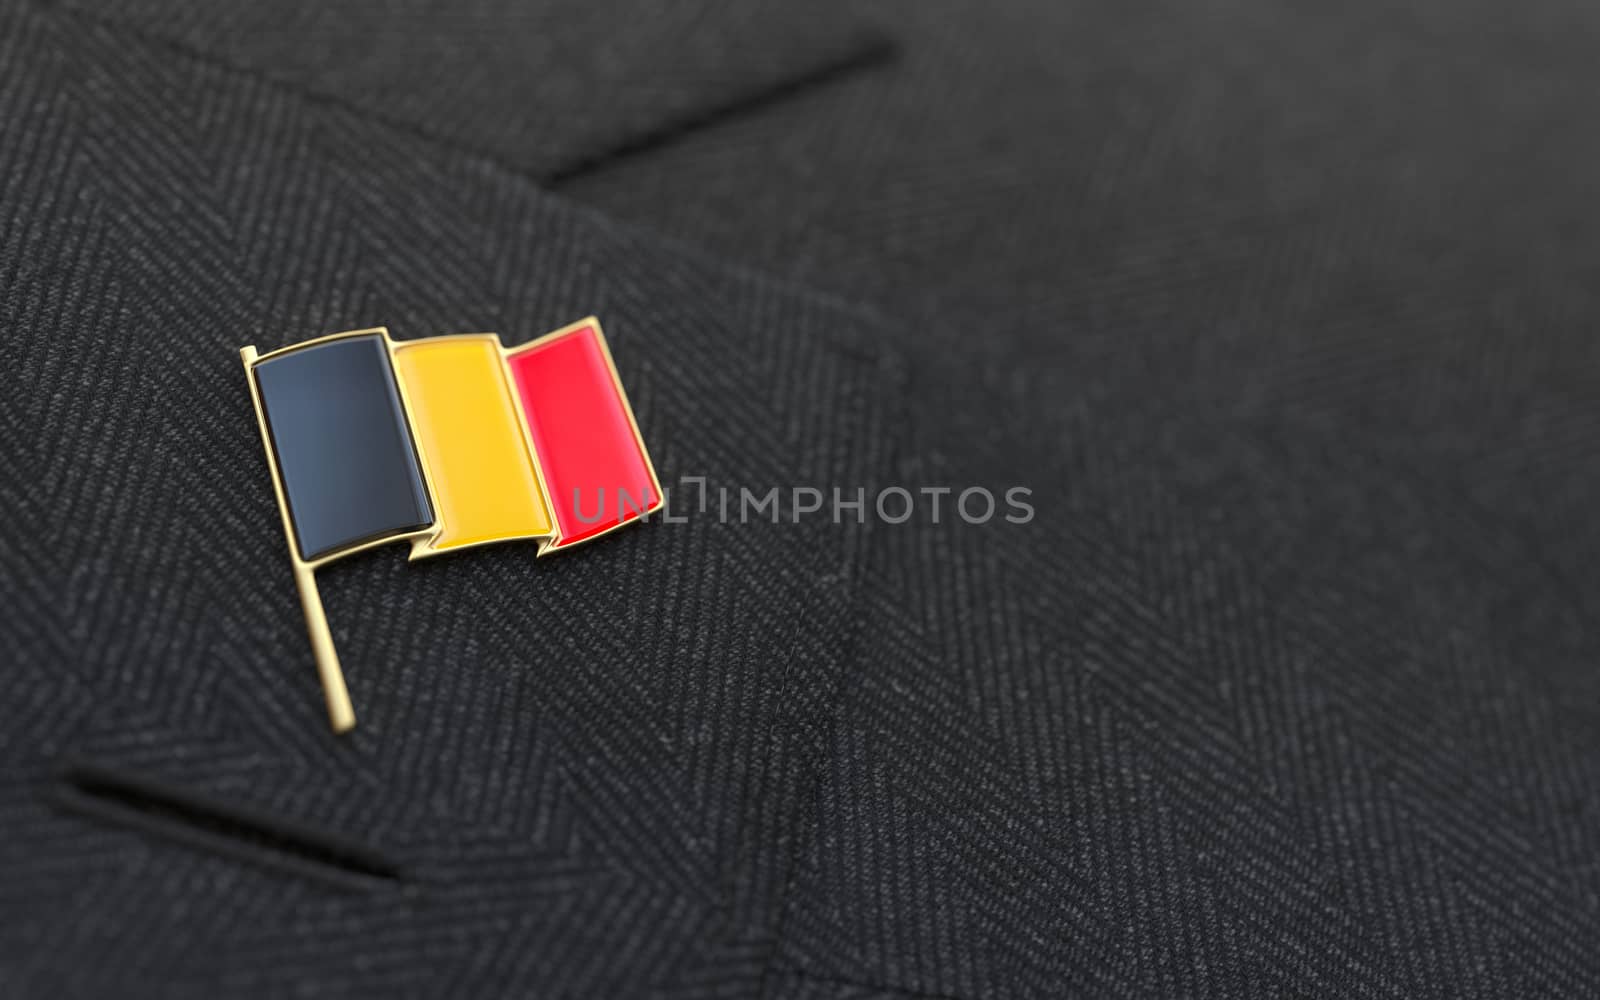 Belgium flag lapel pin on the collar of a business suit jacket shows patriotism